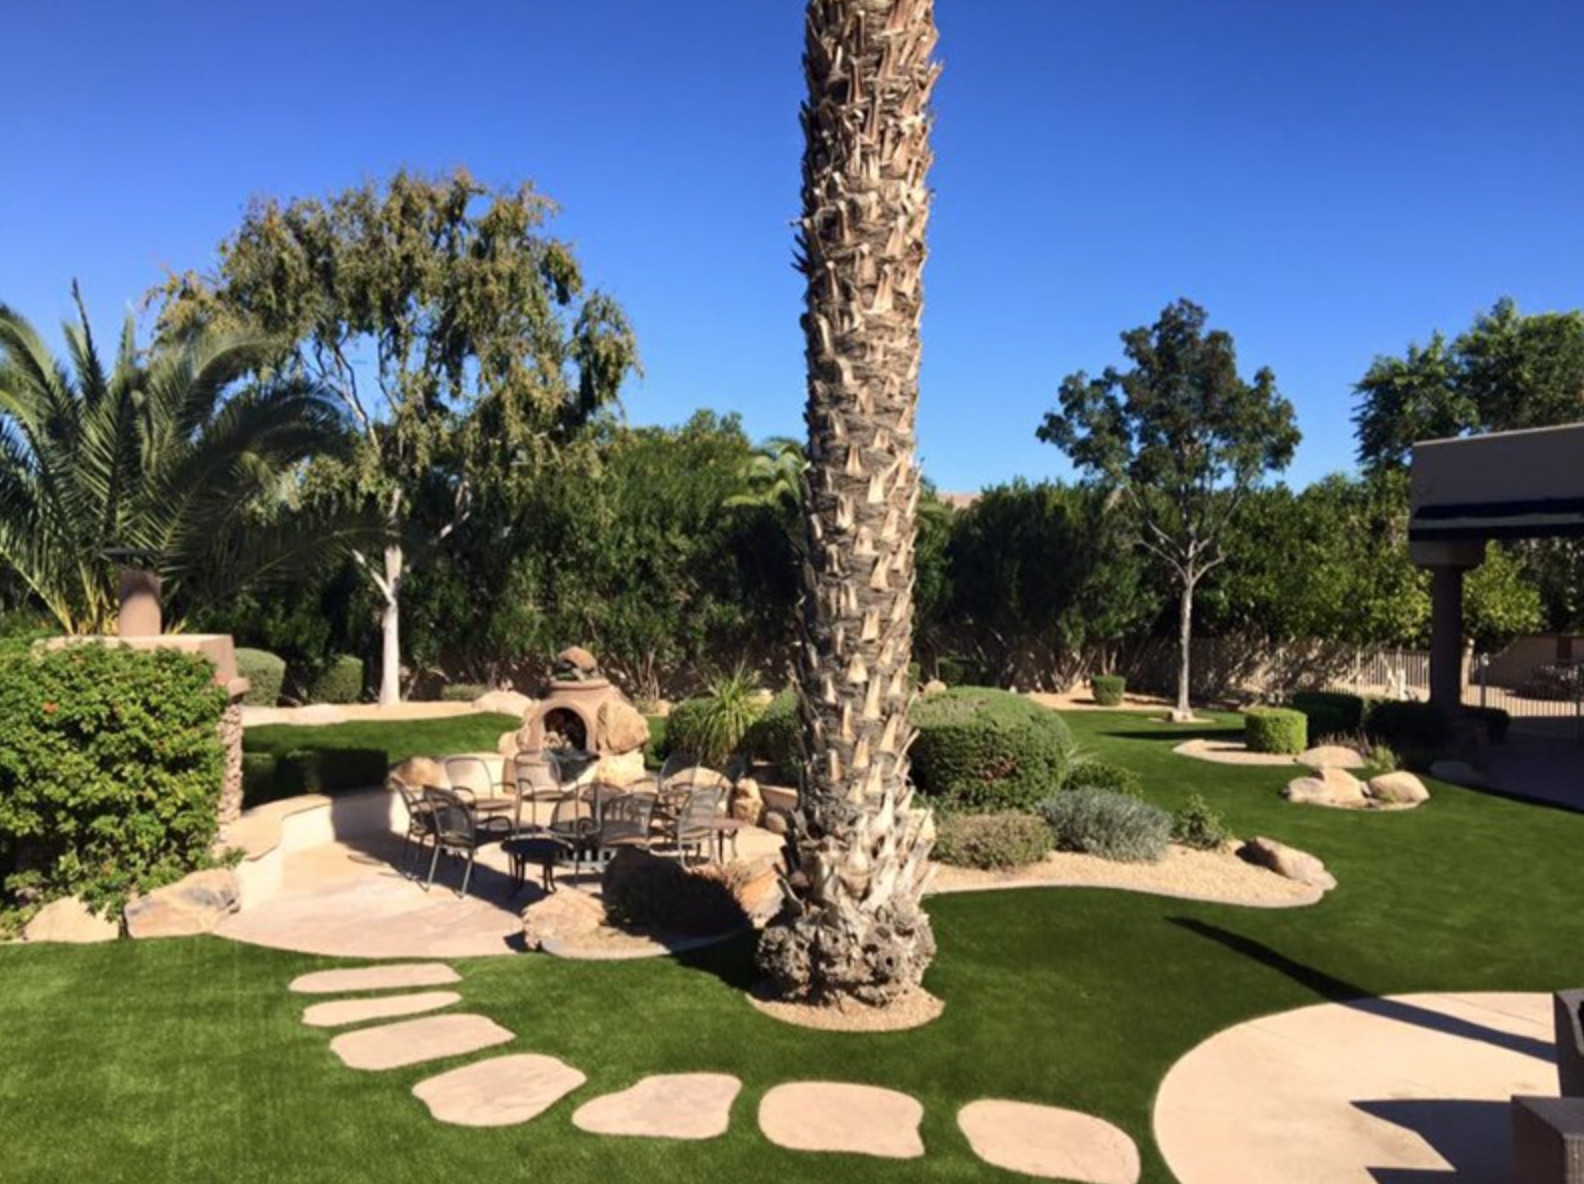  Artificial grass installation with concrete stepping stones inset surrounding paver patio with fire pit and palm trees. 